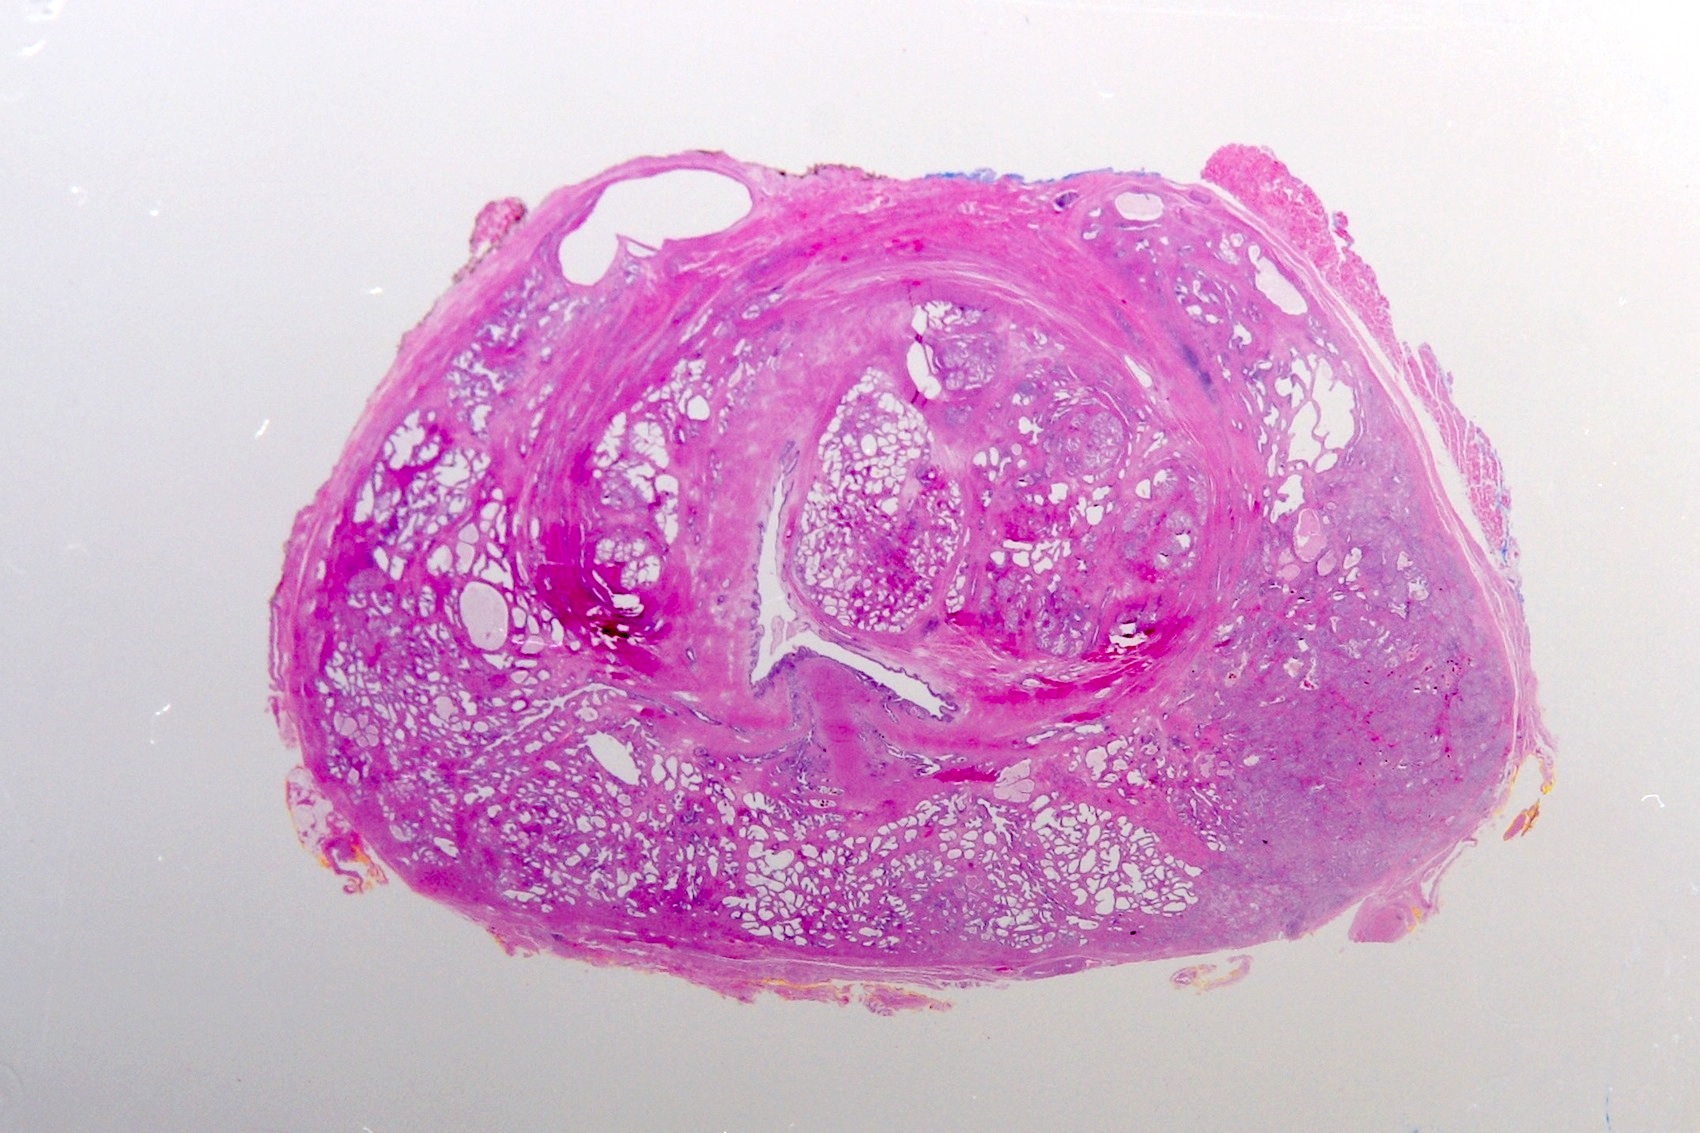 Prostate, cross section with prostatic urethra